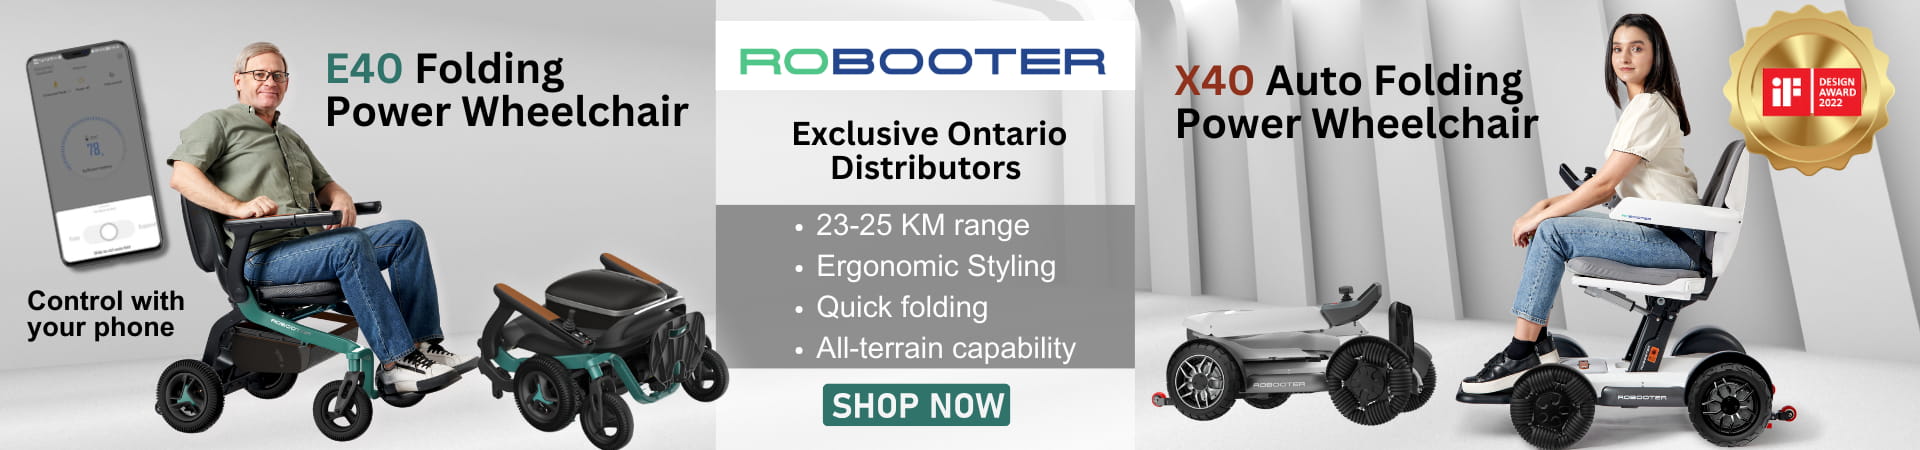 Robooter Folding Electric Wheelchairs